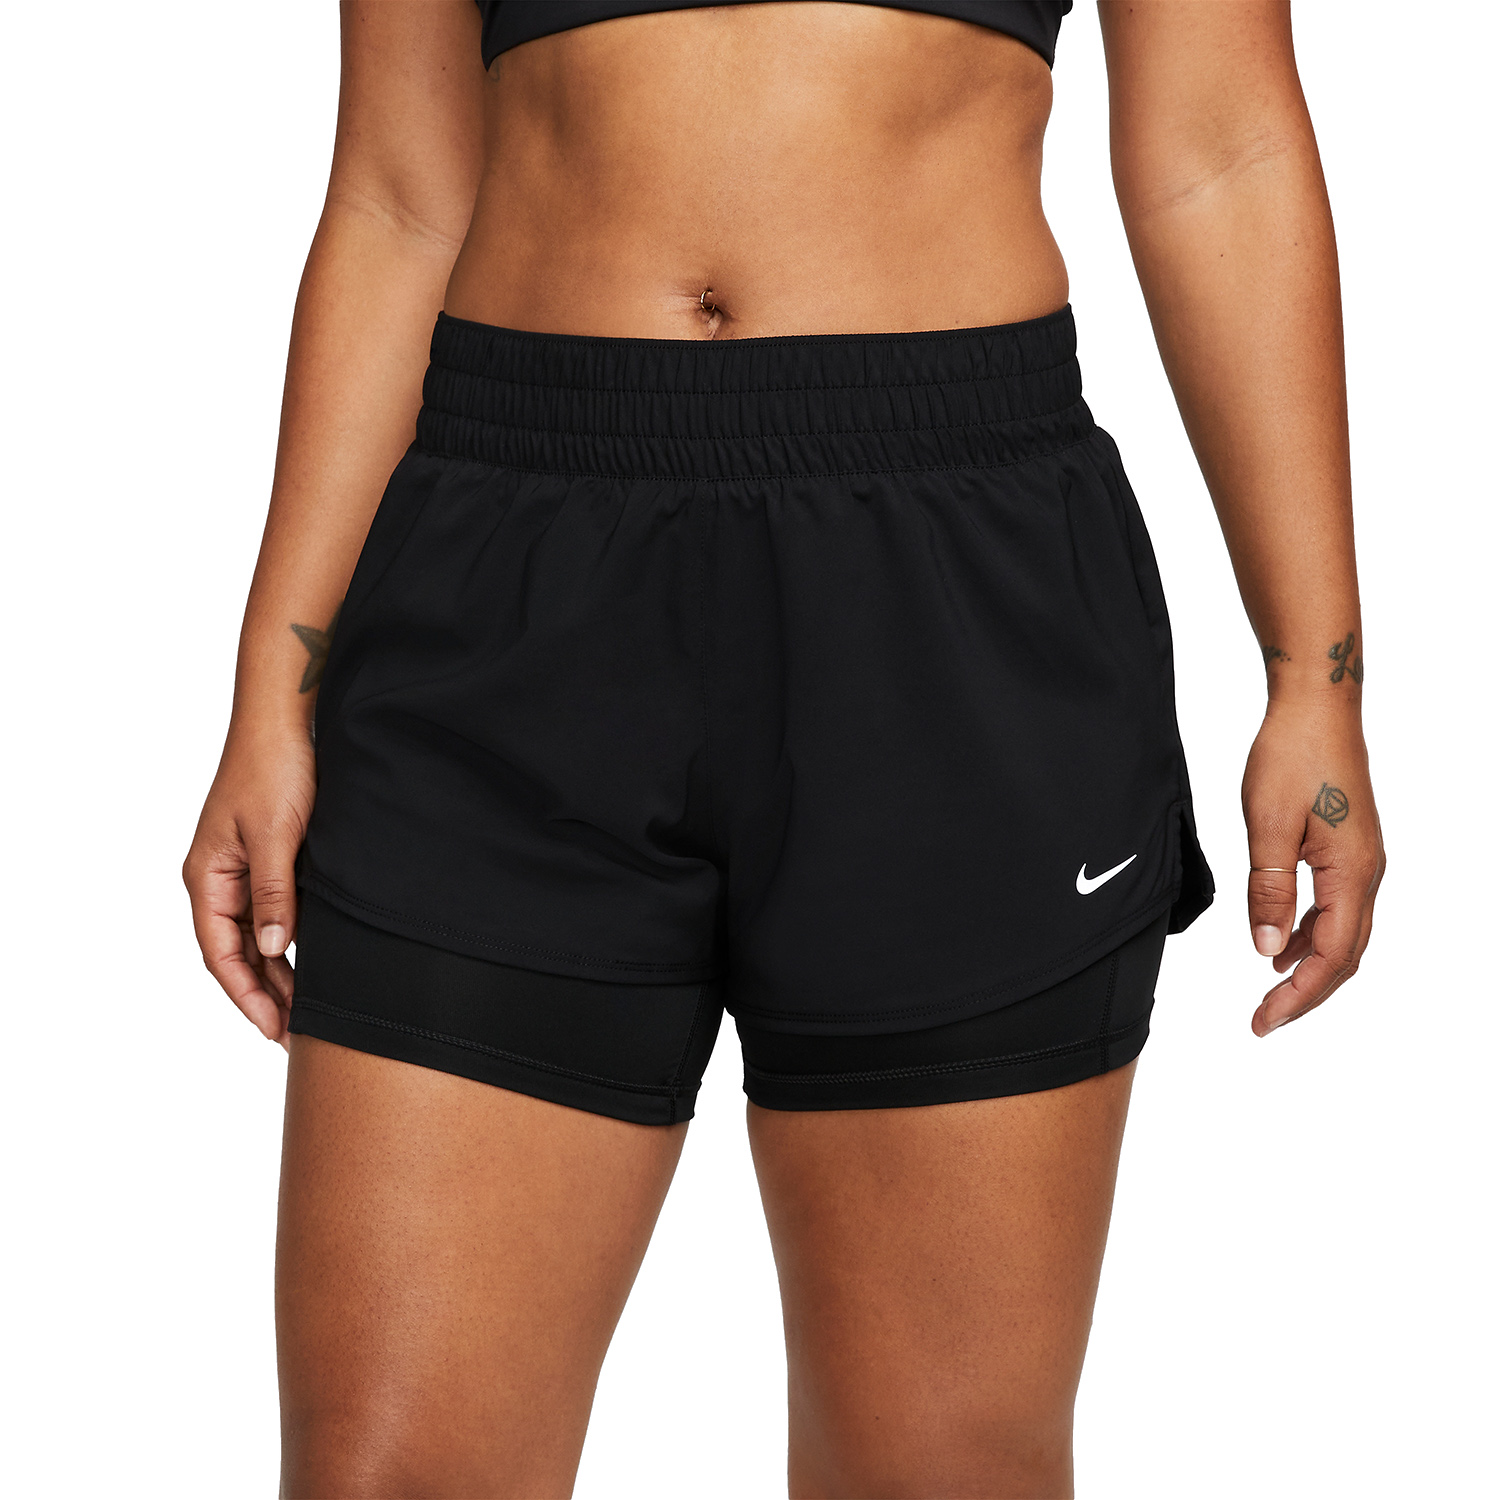 Women's 2 in 1 Running Shorts Quick Dry Sports Workout Gym Shorts， Ladies  Gym Shorts (XXL, Black)